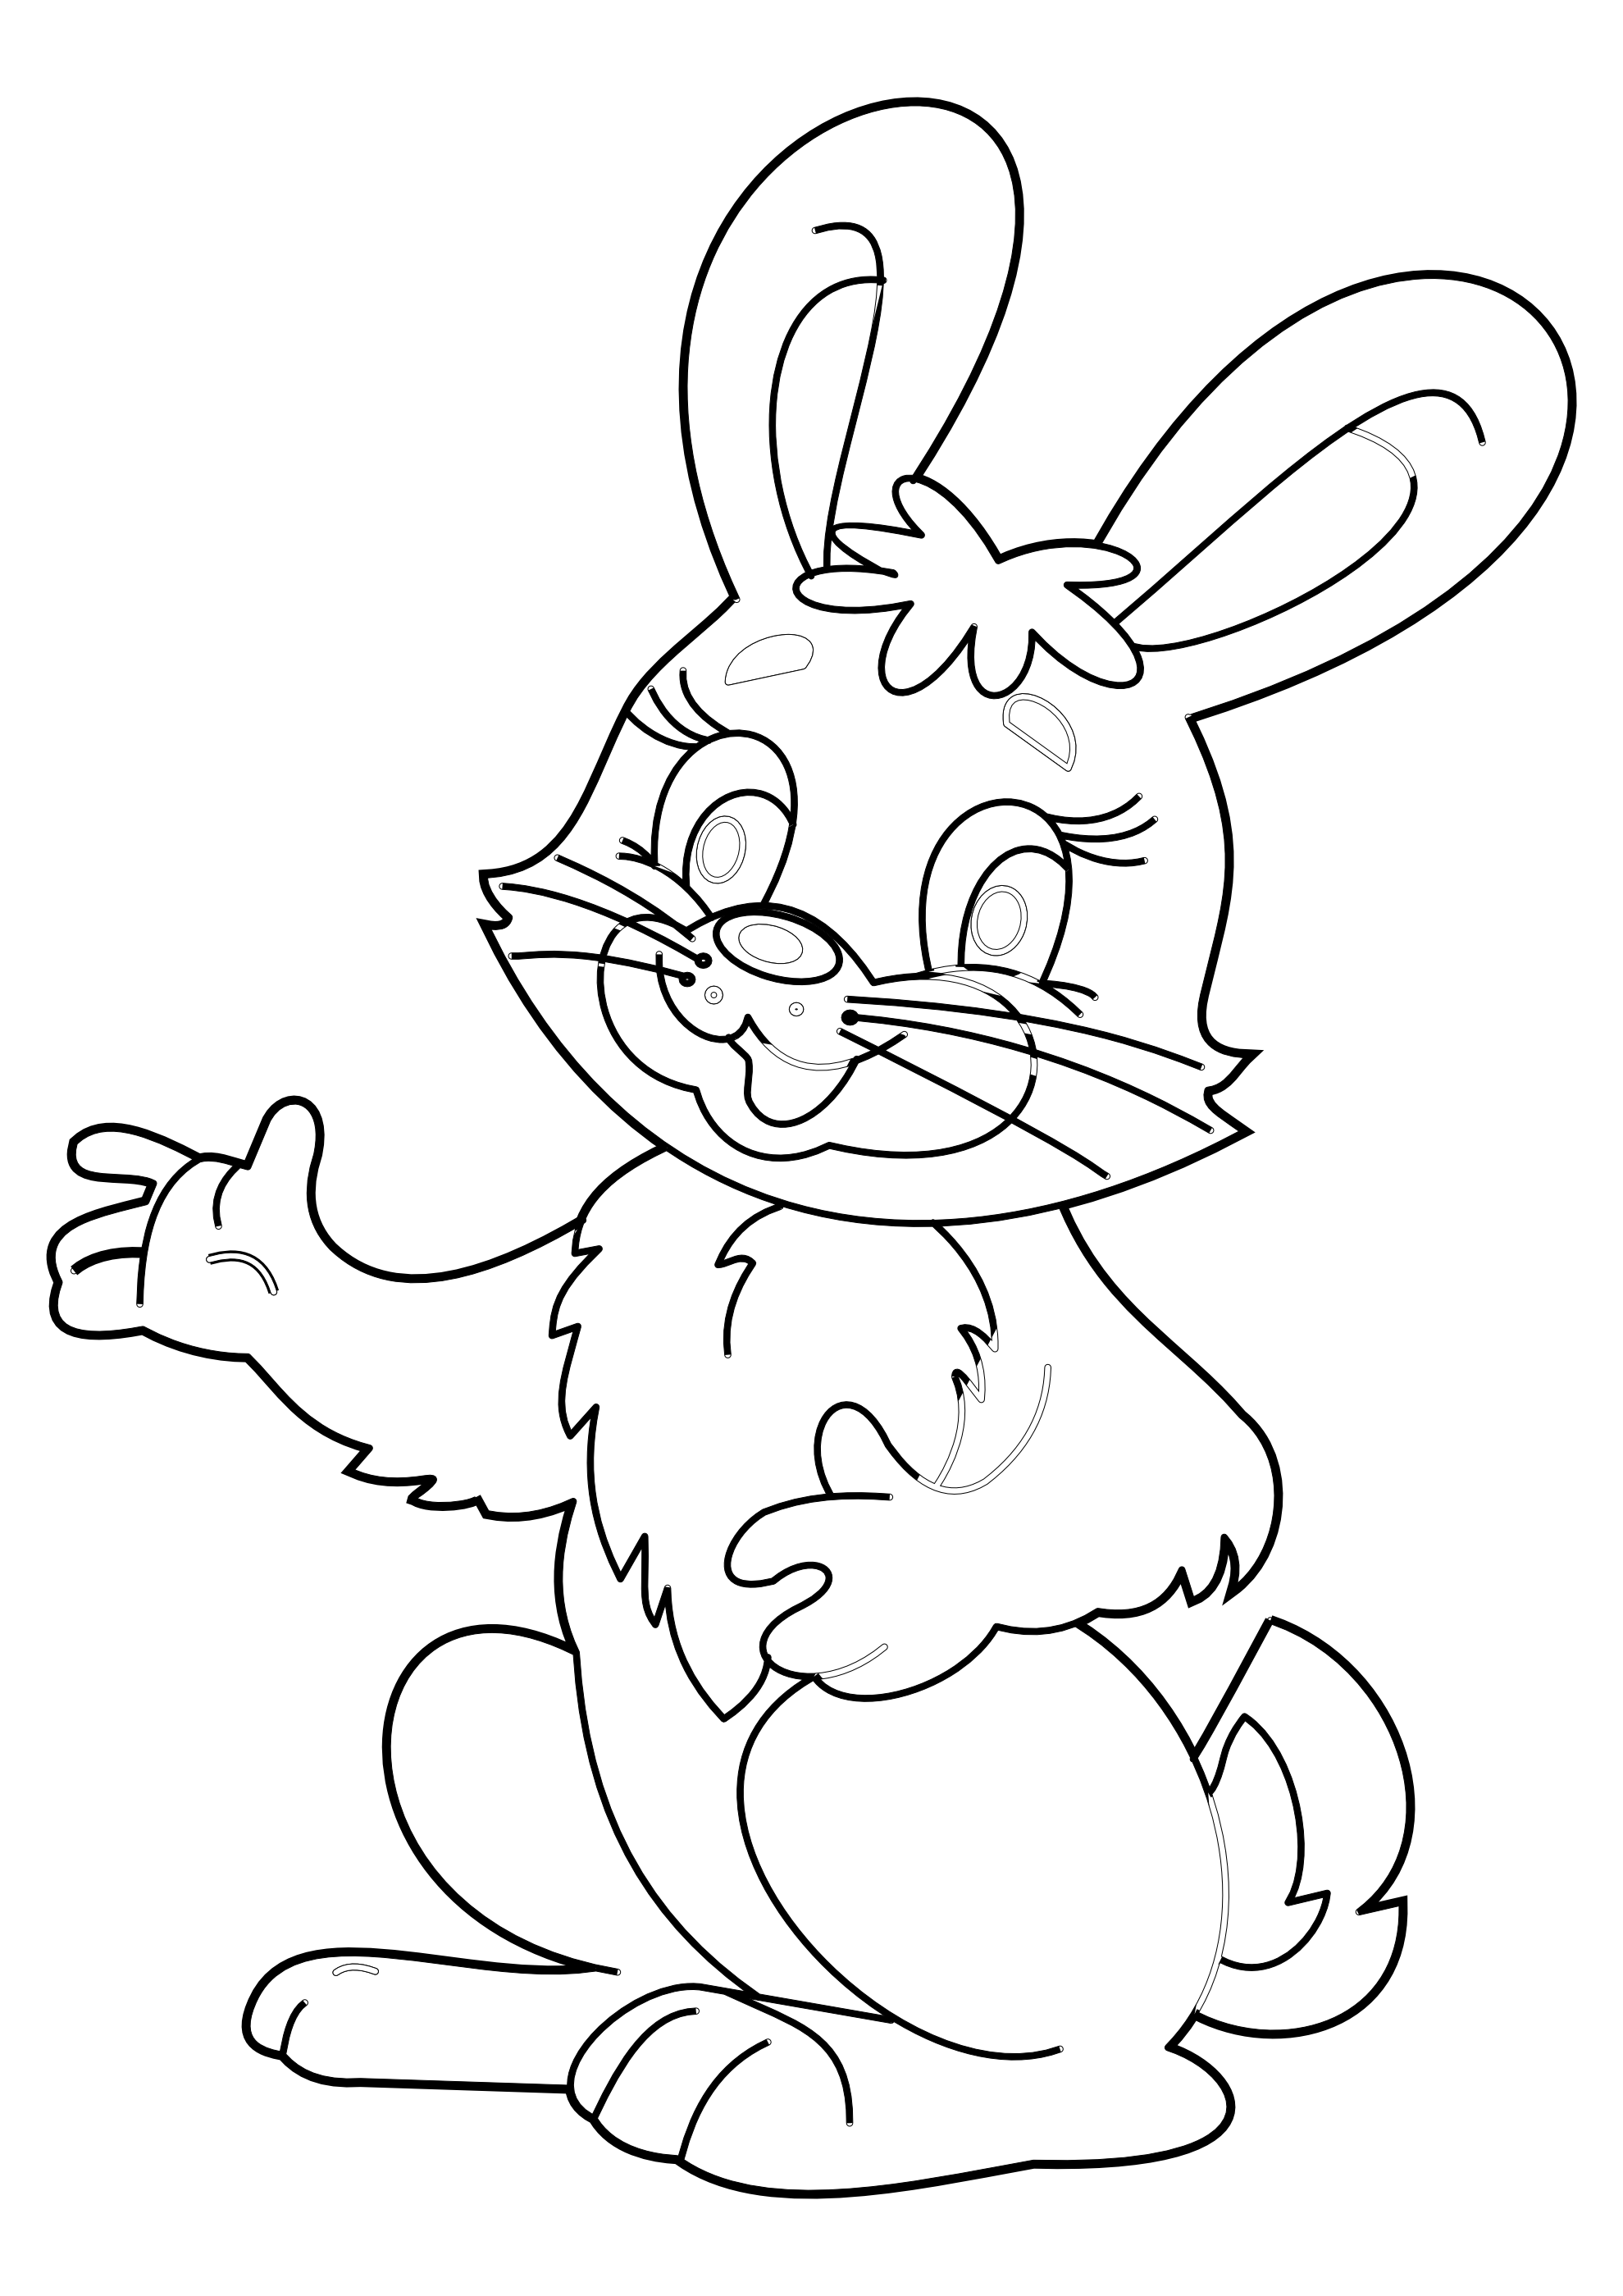 Easter clipart black and white, Easter black and white Transparent FREE